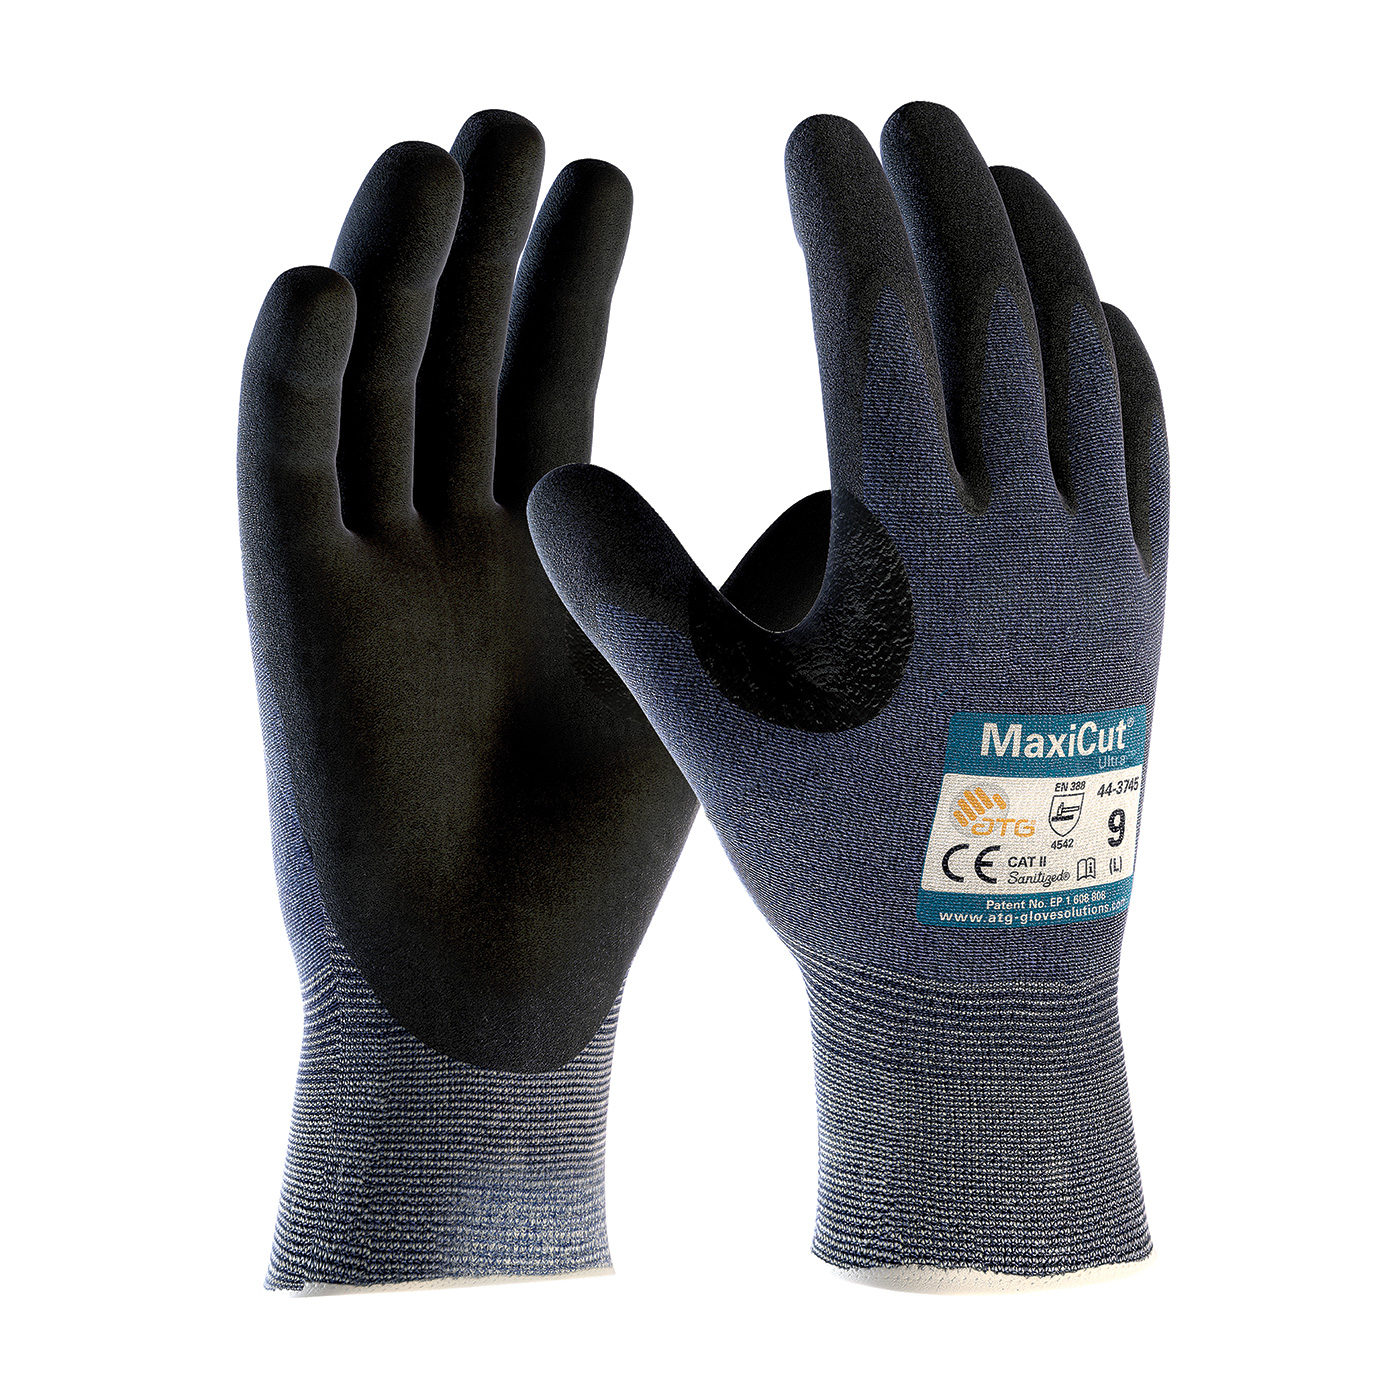 PIP 44-3745/S MaxiCut Ultra Seamless Knit Engineered Yarn Glove with Premium Nitrile Coated MicroFoam Grip on Palm & Fingers - Small PID-44 3745 S